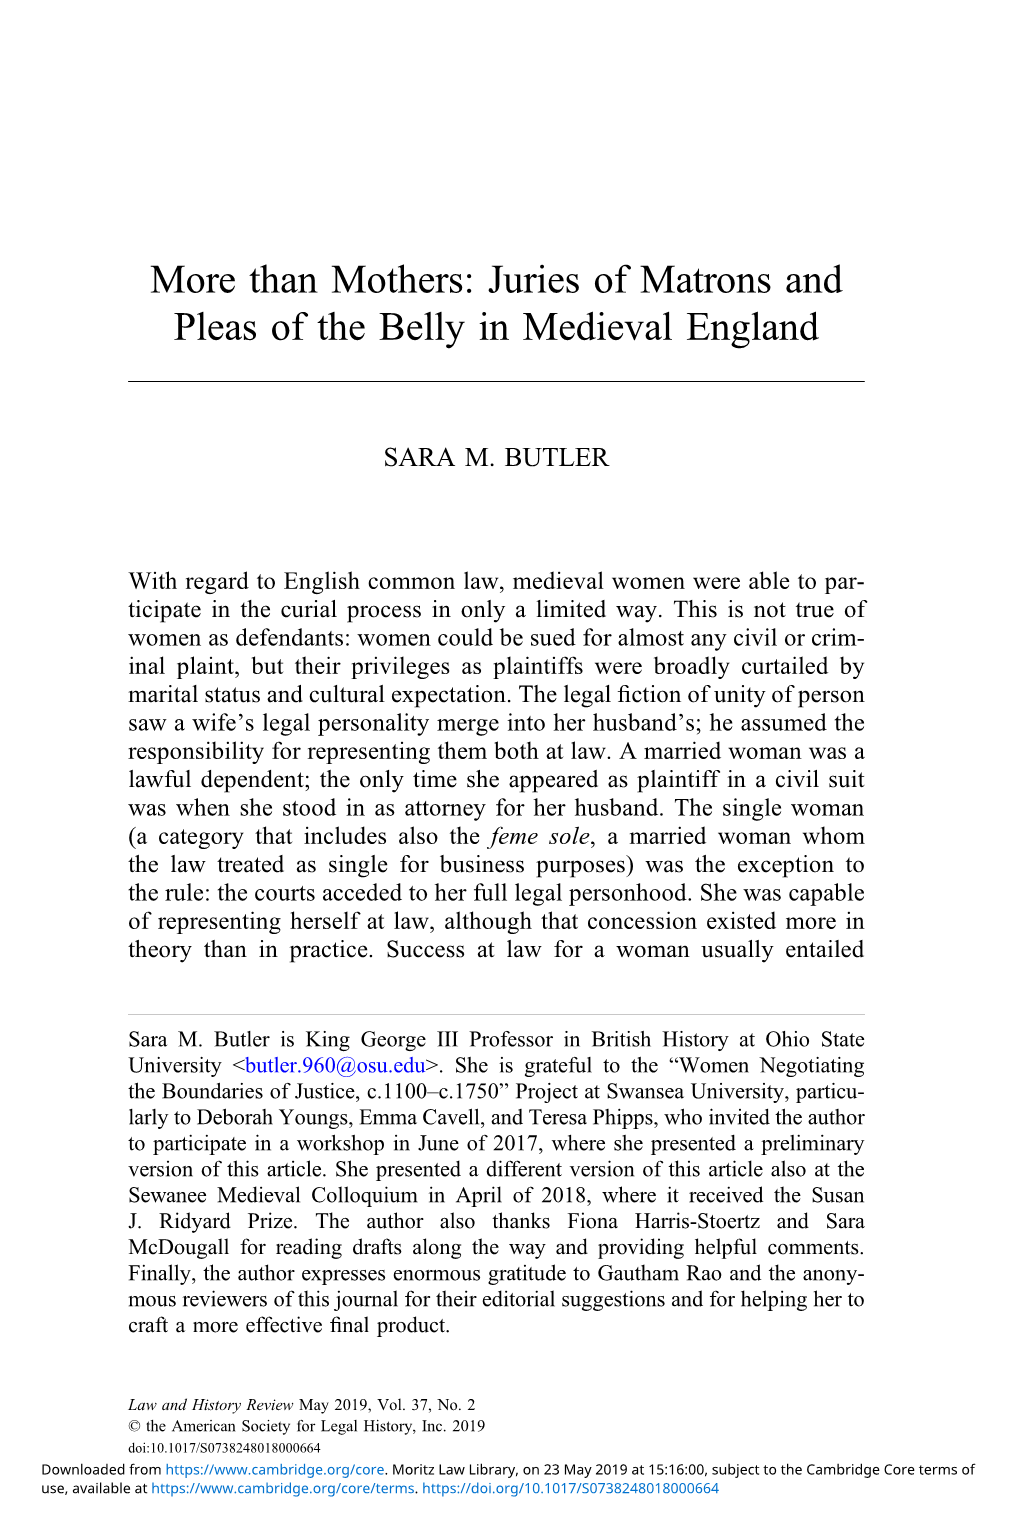 More Than Mothers: Juries of Matrons and Pleas of the Belly in Medieval England